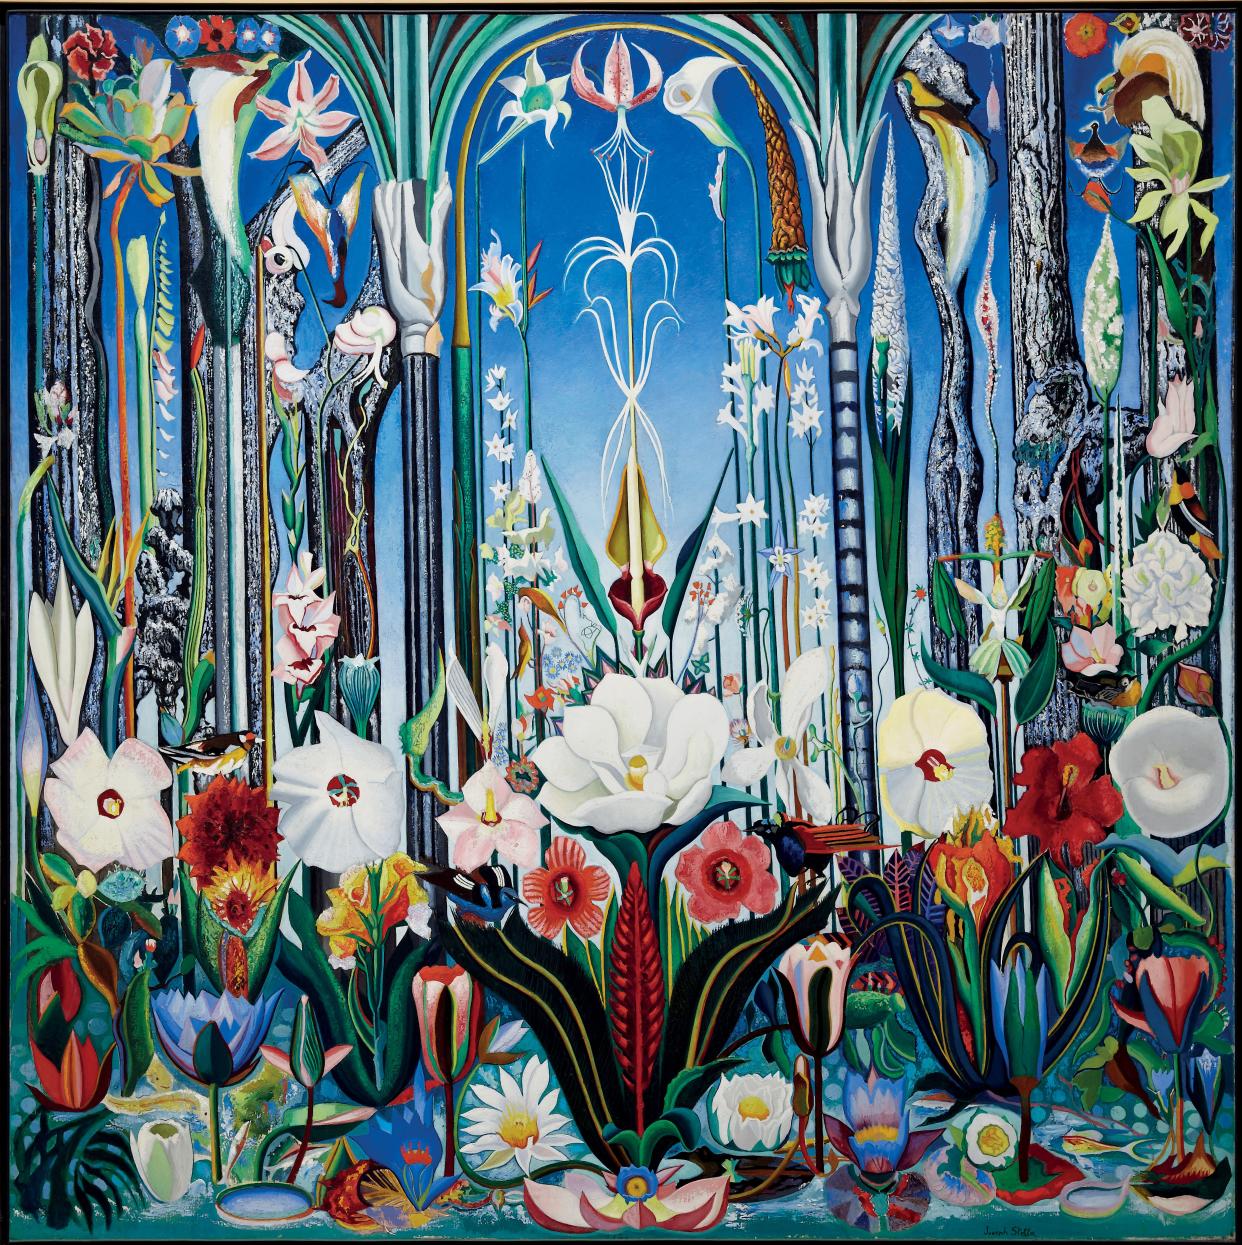 The 1931 work 'Flowers, Italy' is part of an 'in-depth exploration into the artist’s fascination with the natural world,' said Norton CEO Ghislain d’Humières.